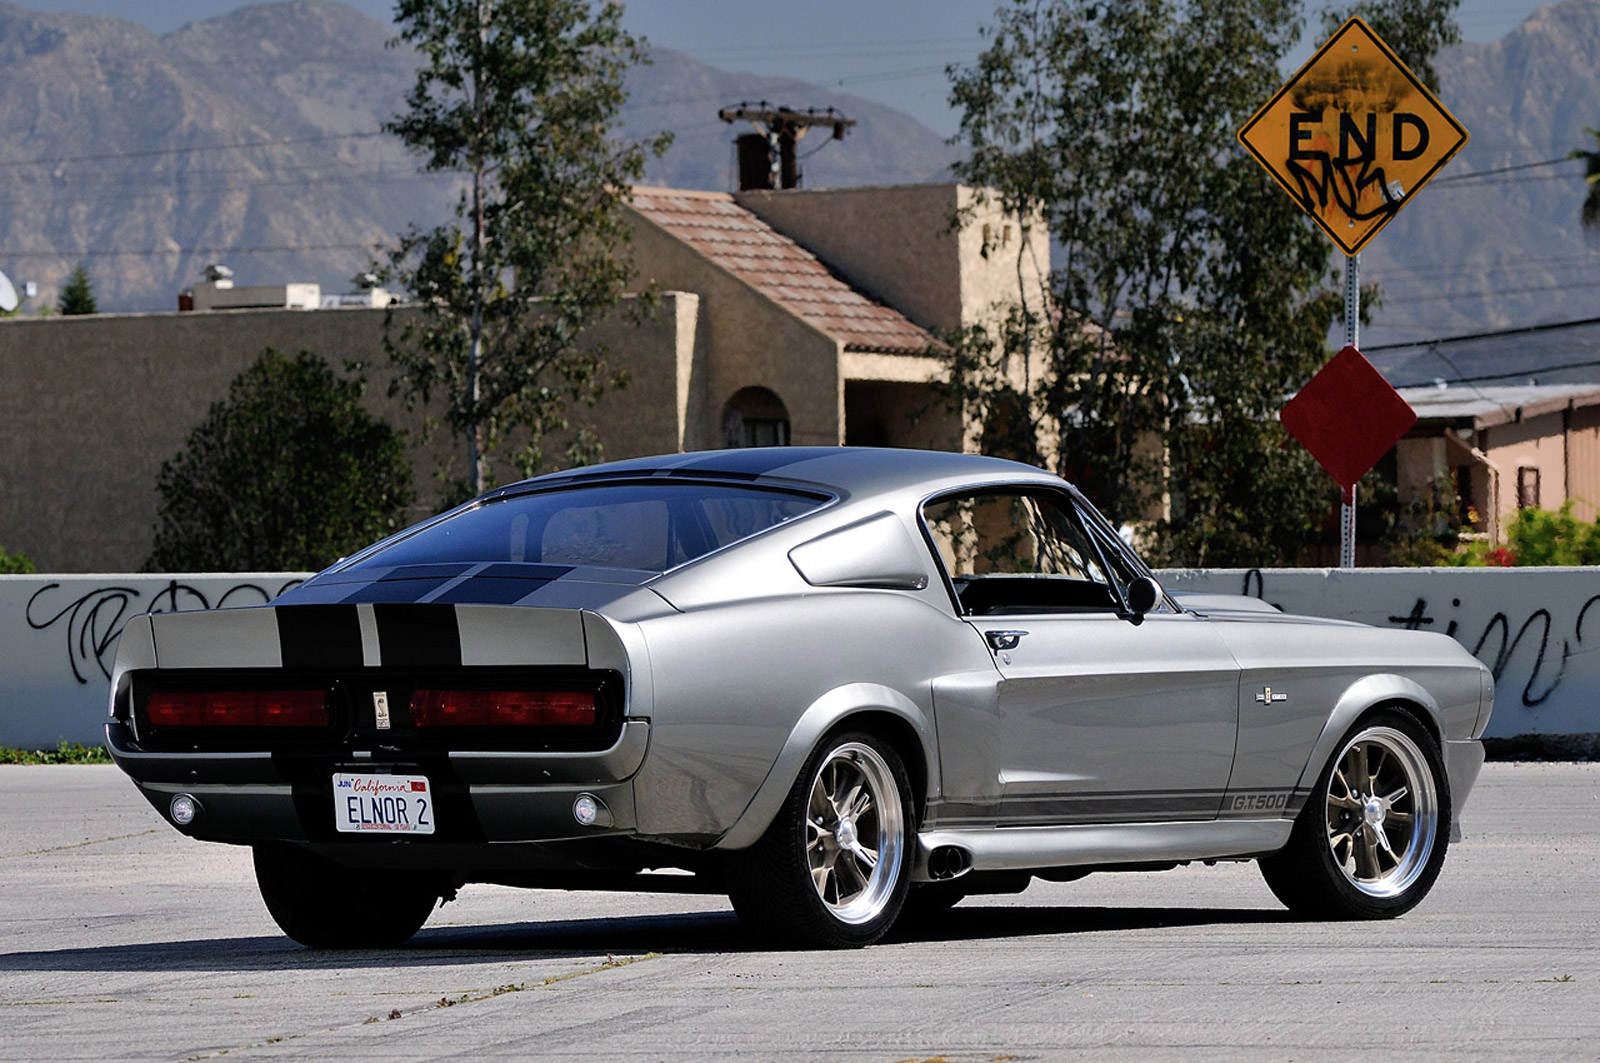 1967 Ford Mustang used in Gone in 60 Seconds